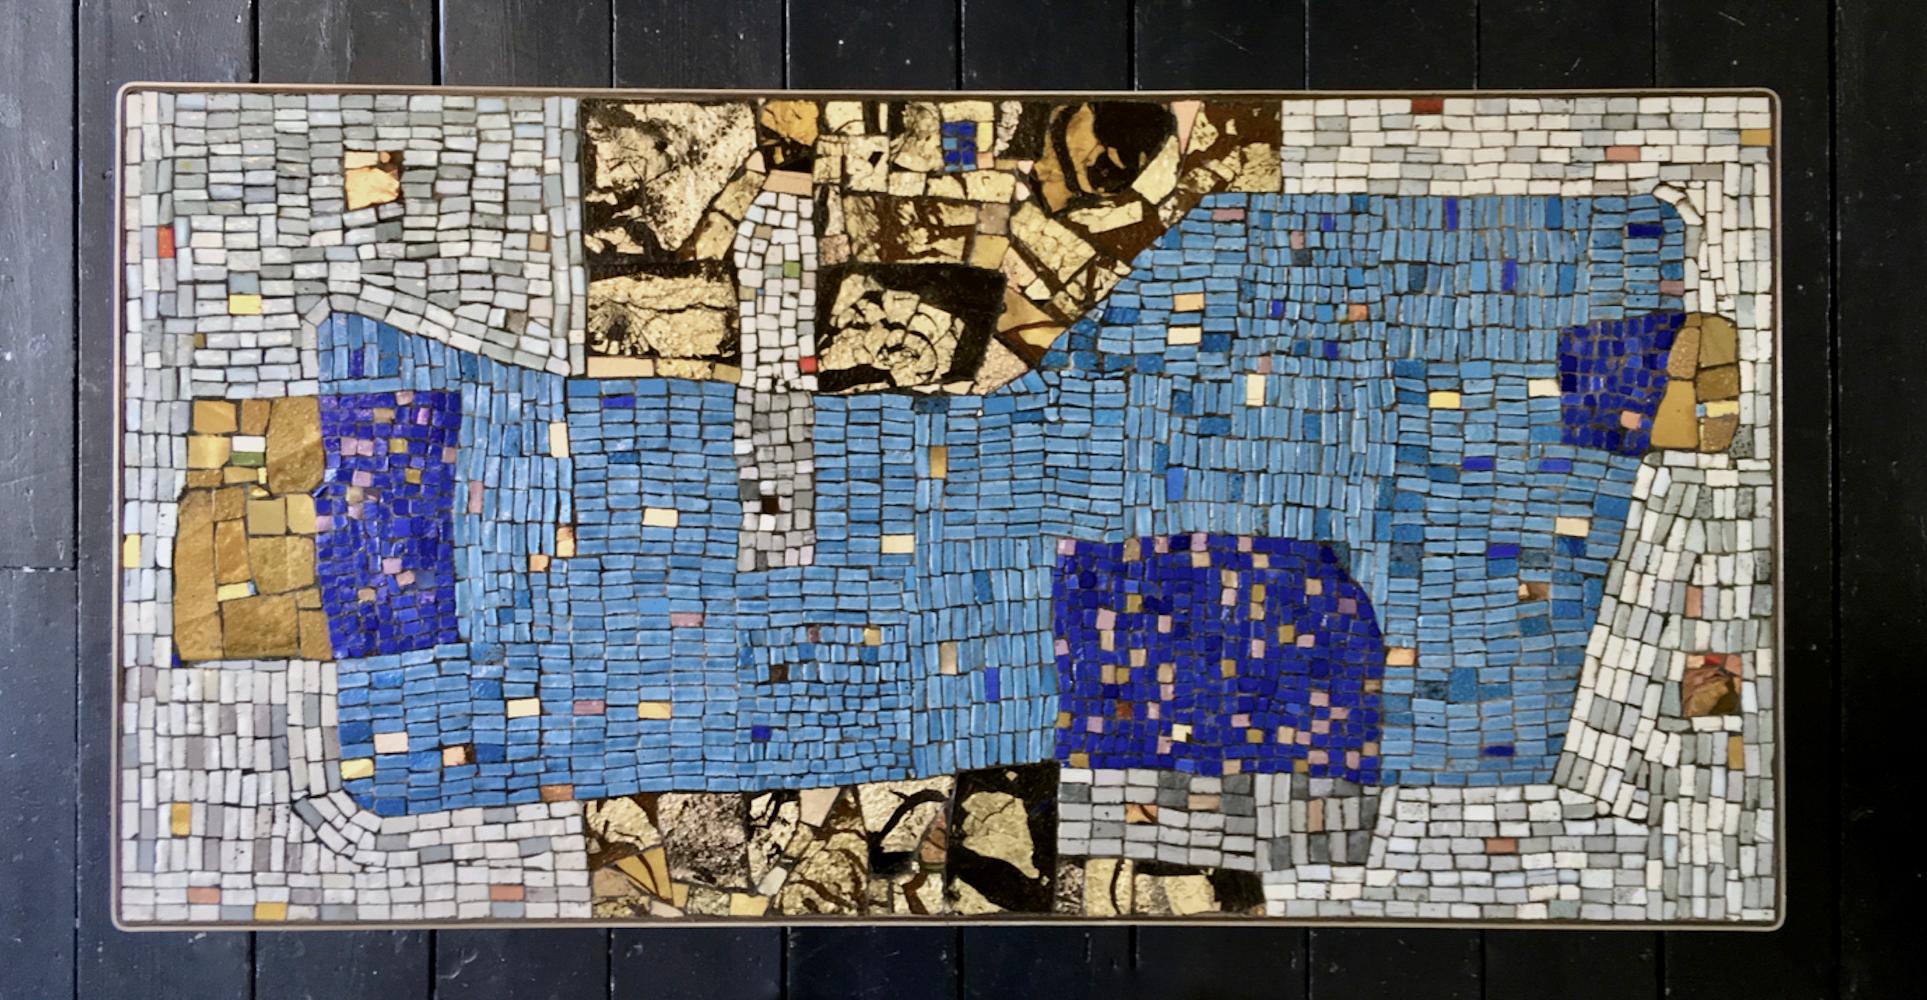 Handmade mosaic table by the German artist Helmut Lander (1924-2013). Signed and dated 1953.

A rare and beautiful piece, with rectangular top is decorated with irregular mosaic pieces, featuring shades of blue, off-white or pale grey, and earth